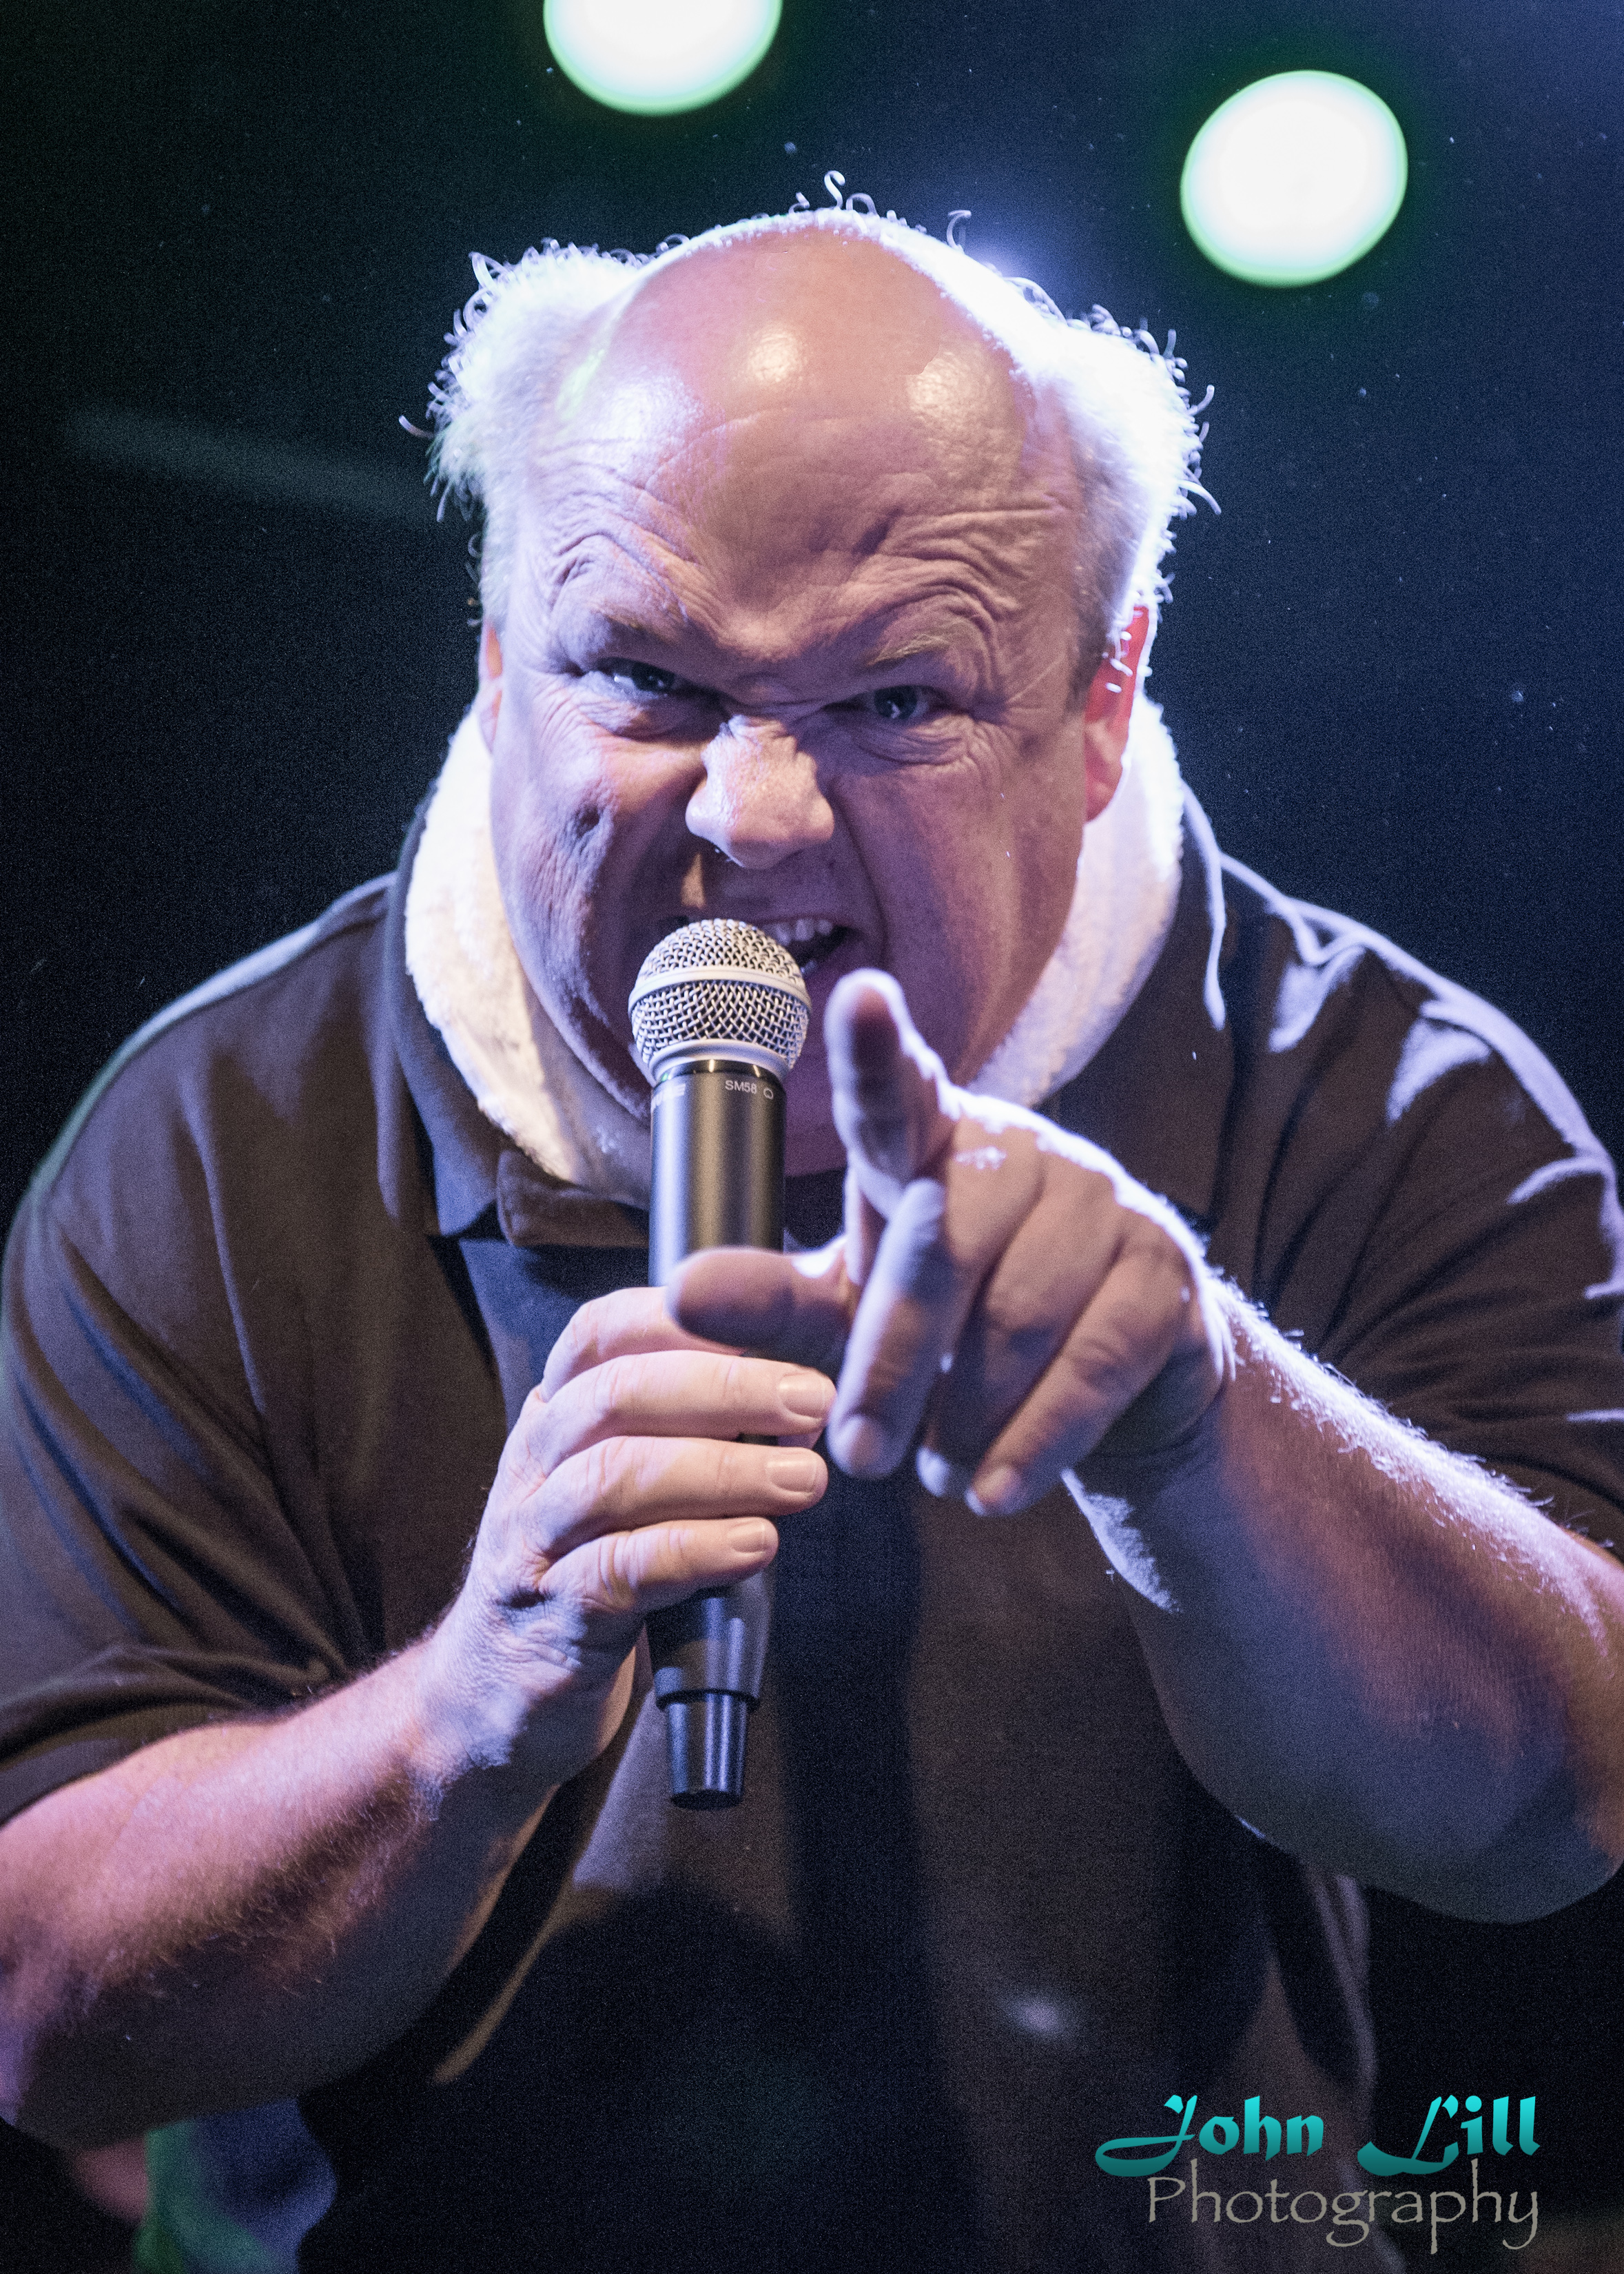 The Kyle Gass Band Live at The Crocodile (Photo by John Lill)